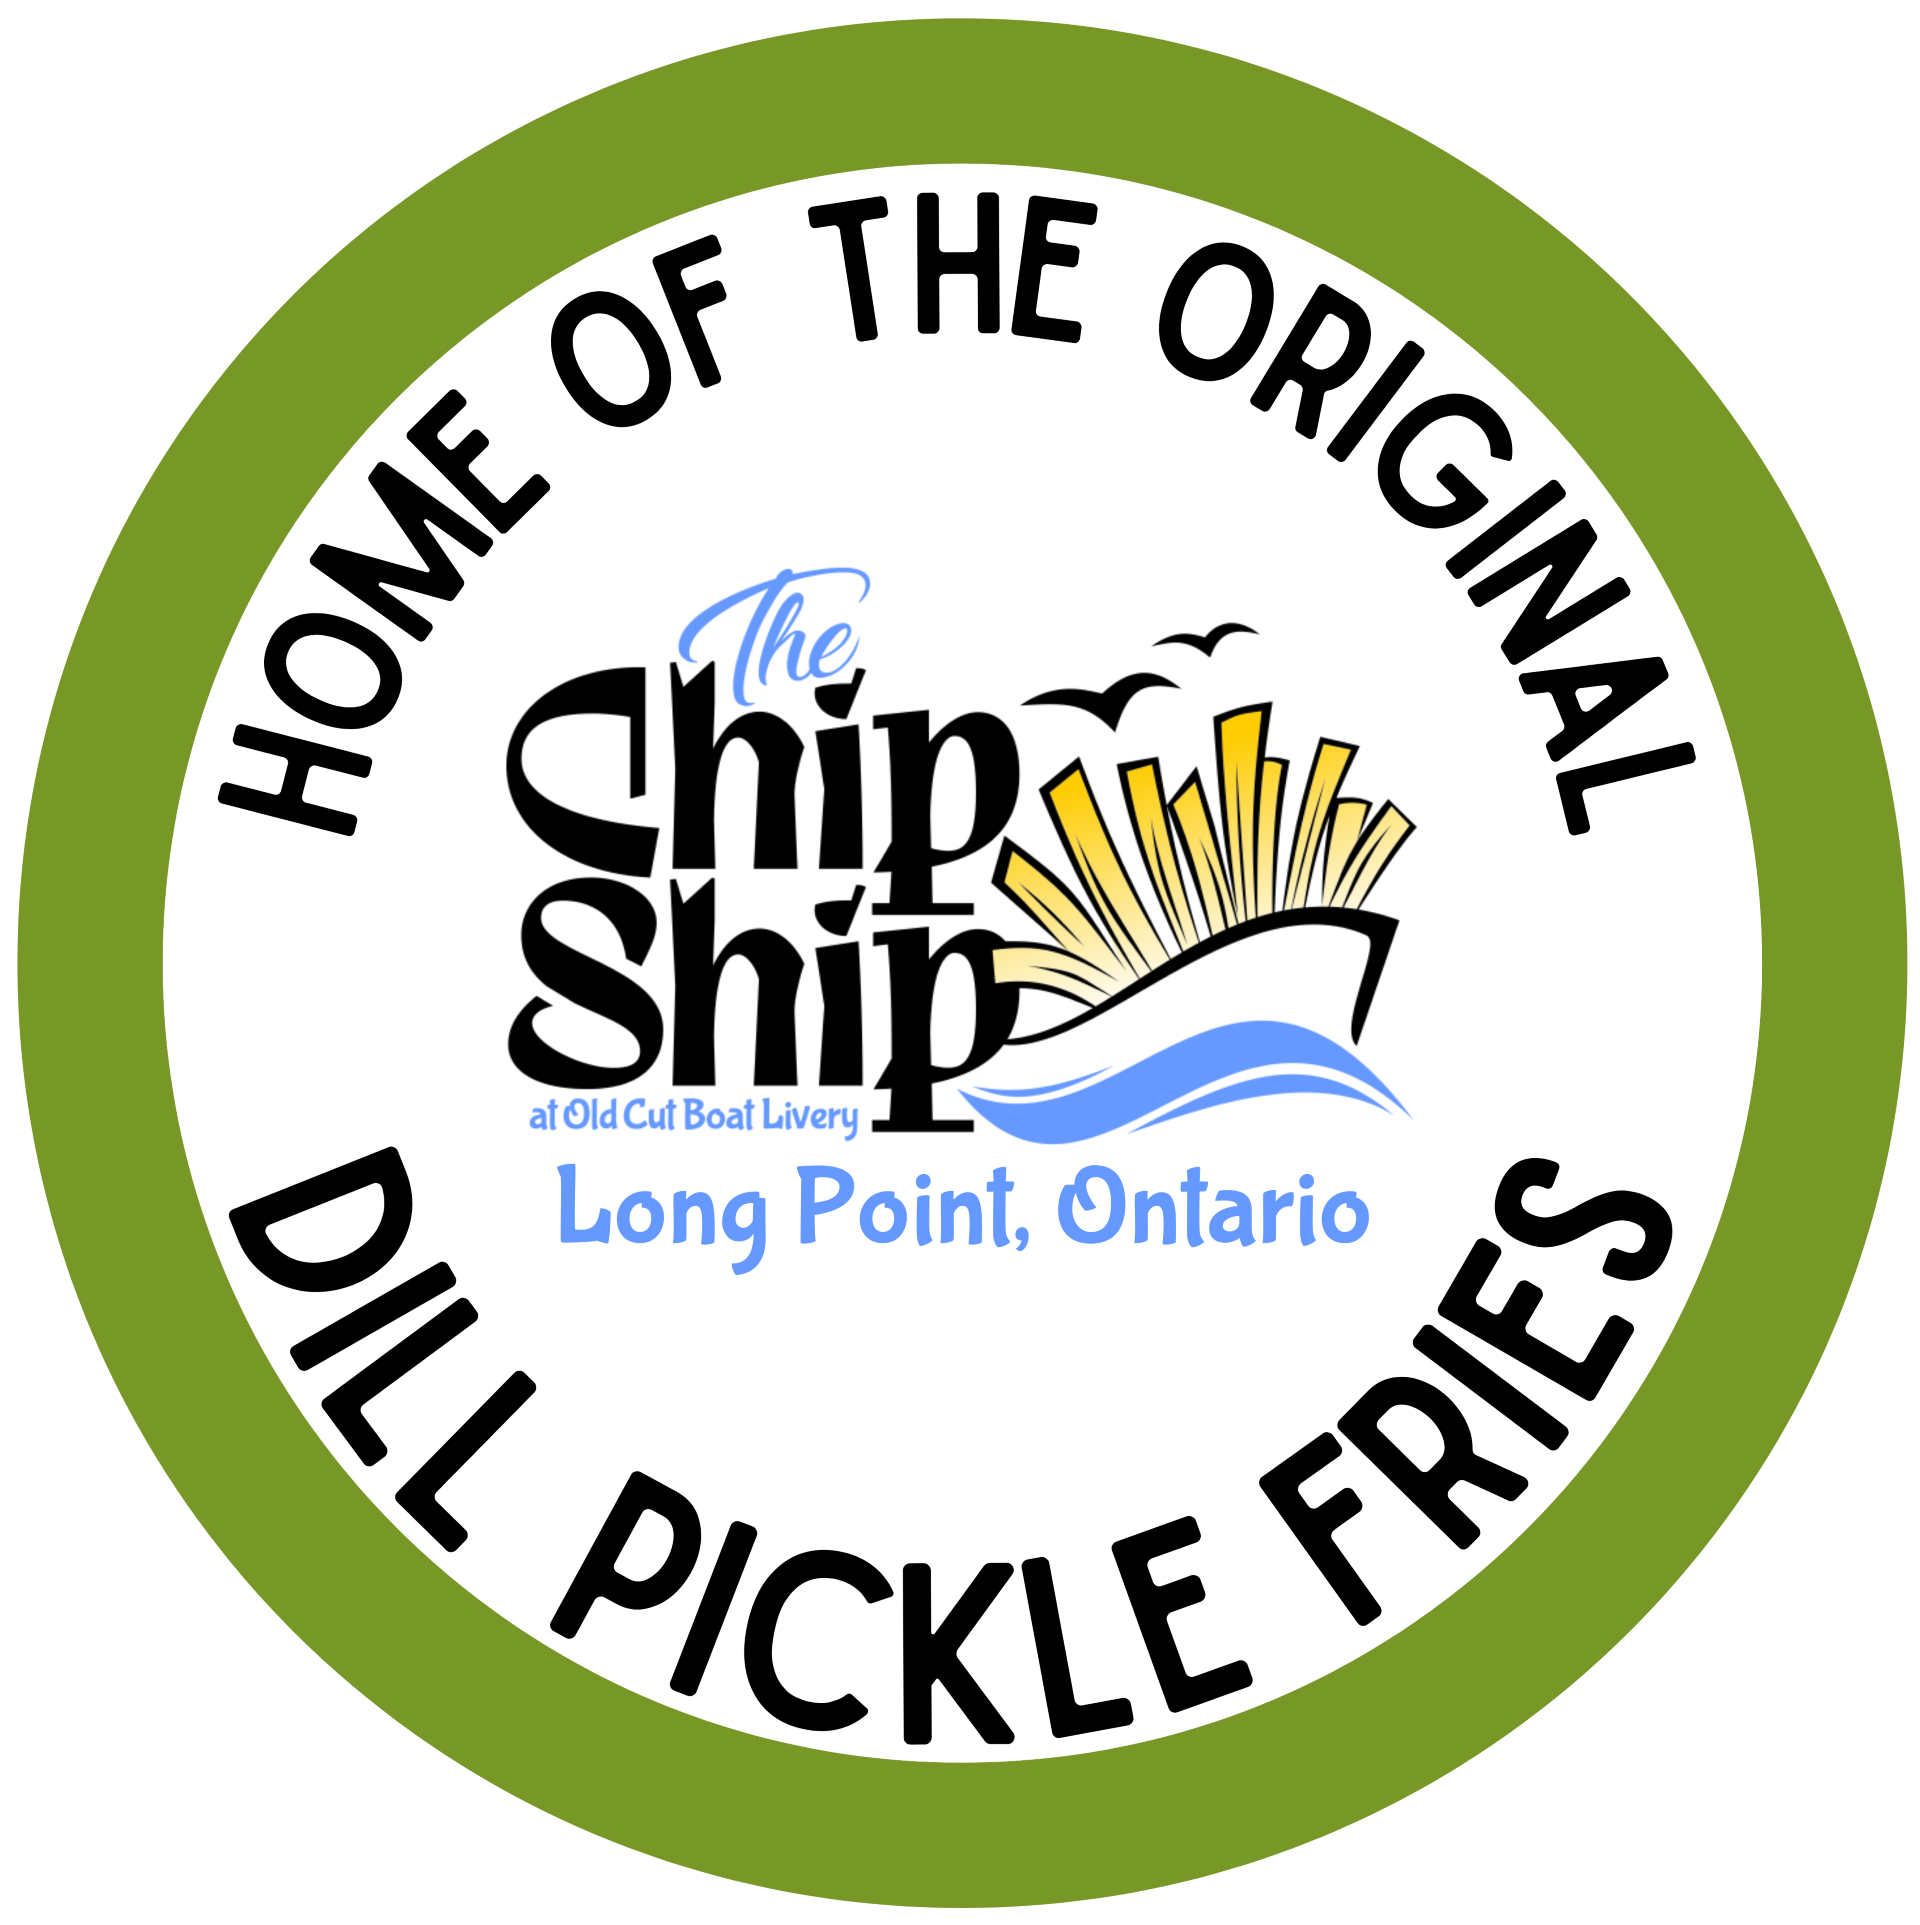 The Chip Ship